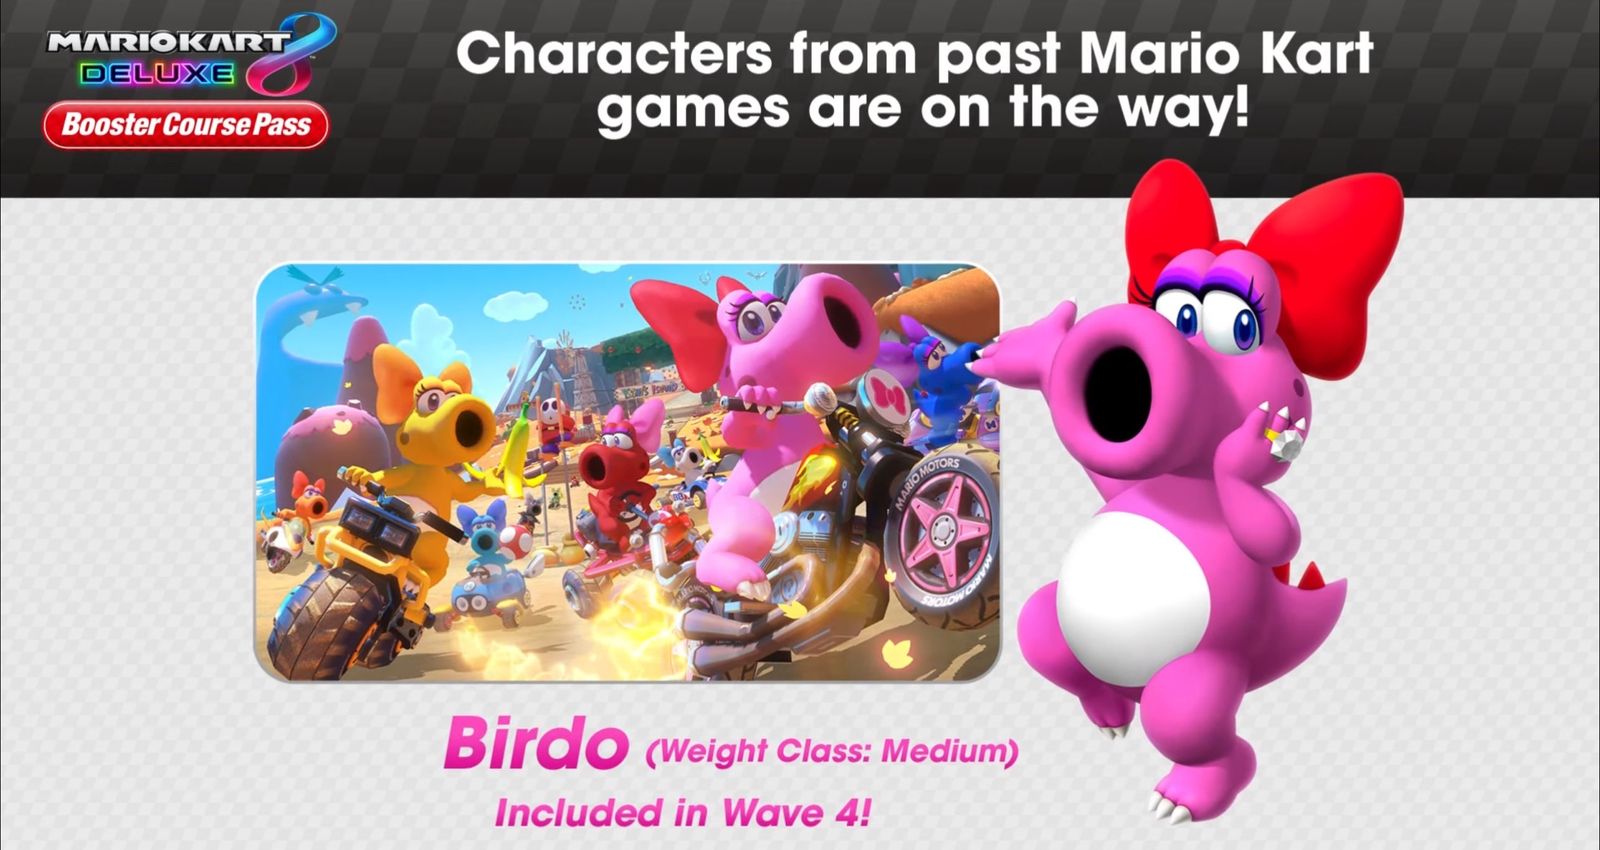 Mario Kart 8 Deluxe Booster Course Pass screenshot from the trailer introducing Birdo as a character and saying "Characters from past Mario Kart games are on the way!"